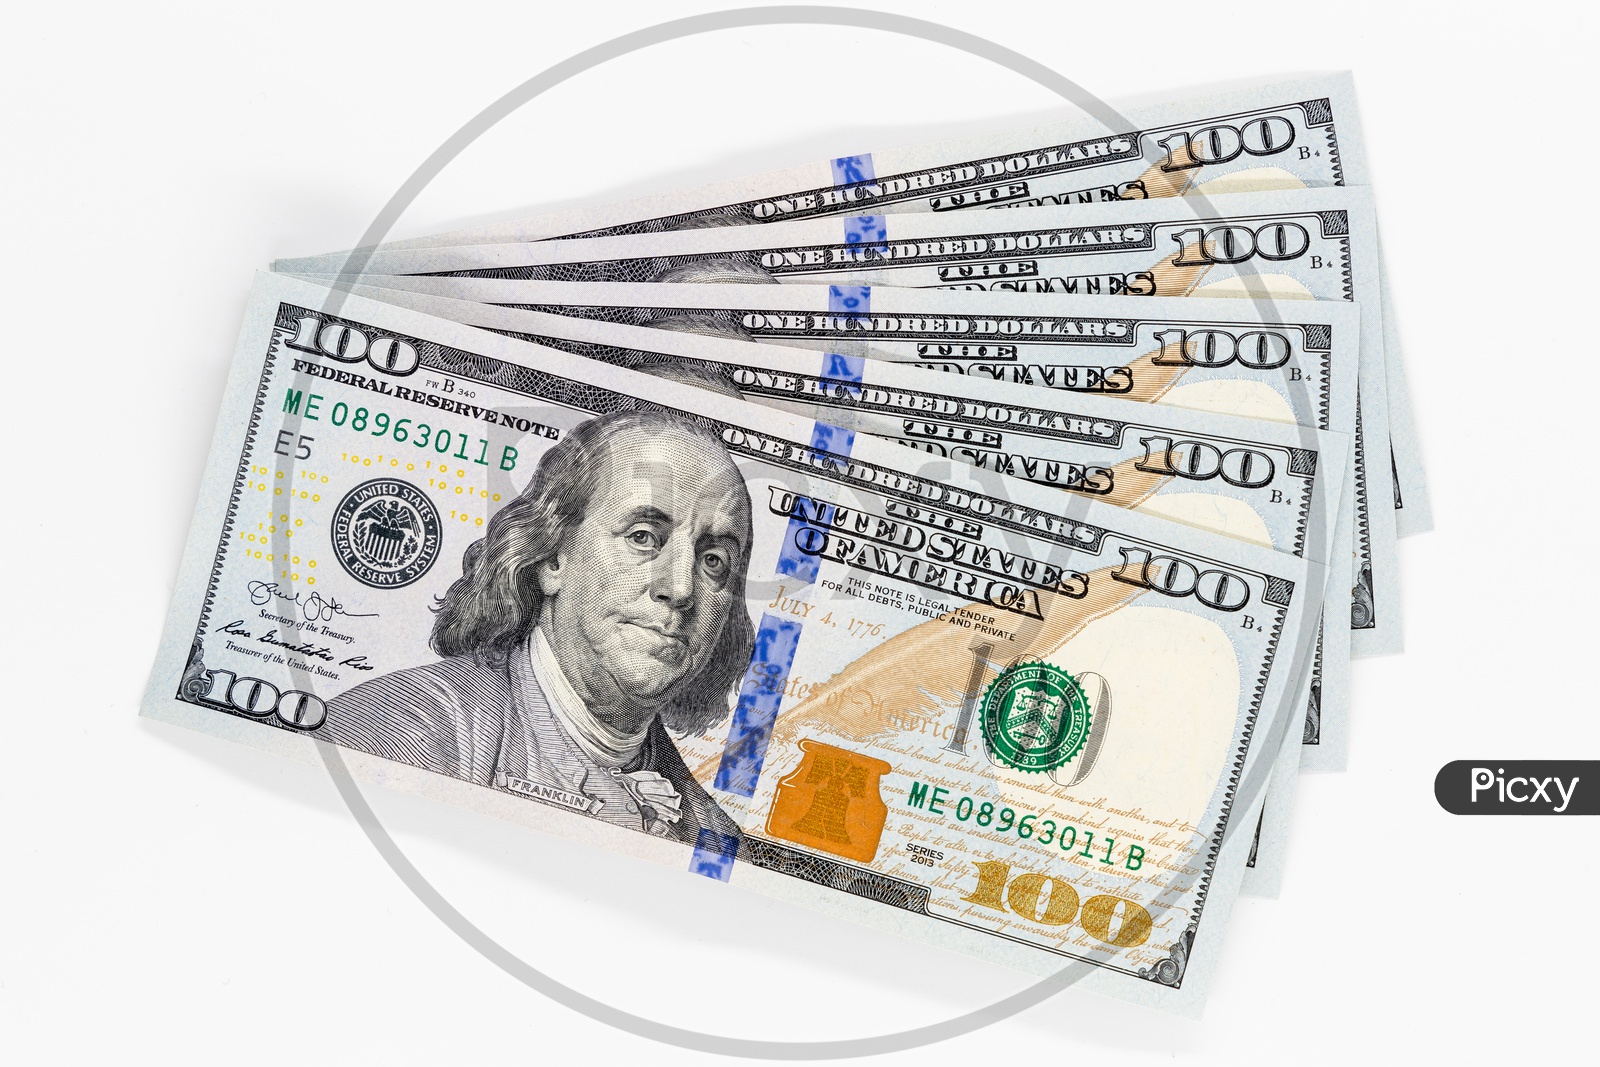 US 100 Dollar Currency Notes or Dollar Bills Closeup on an Isolated White Background